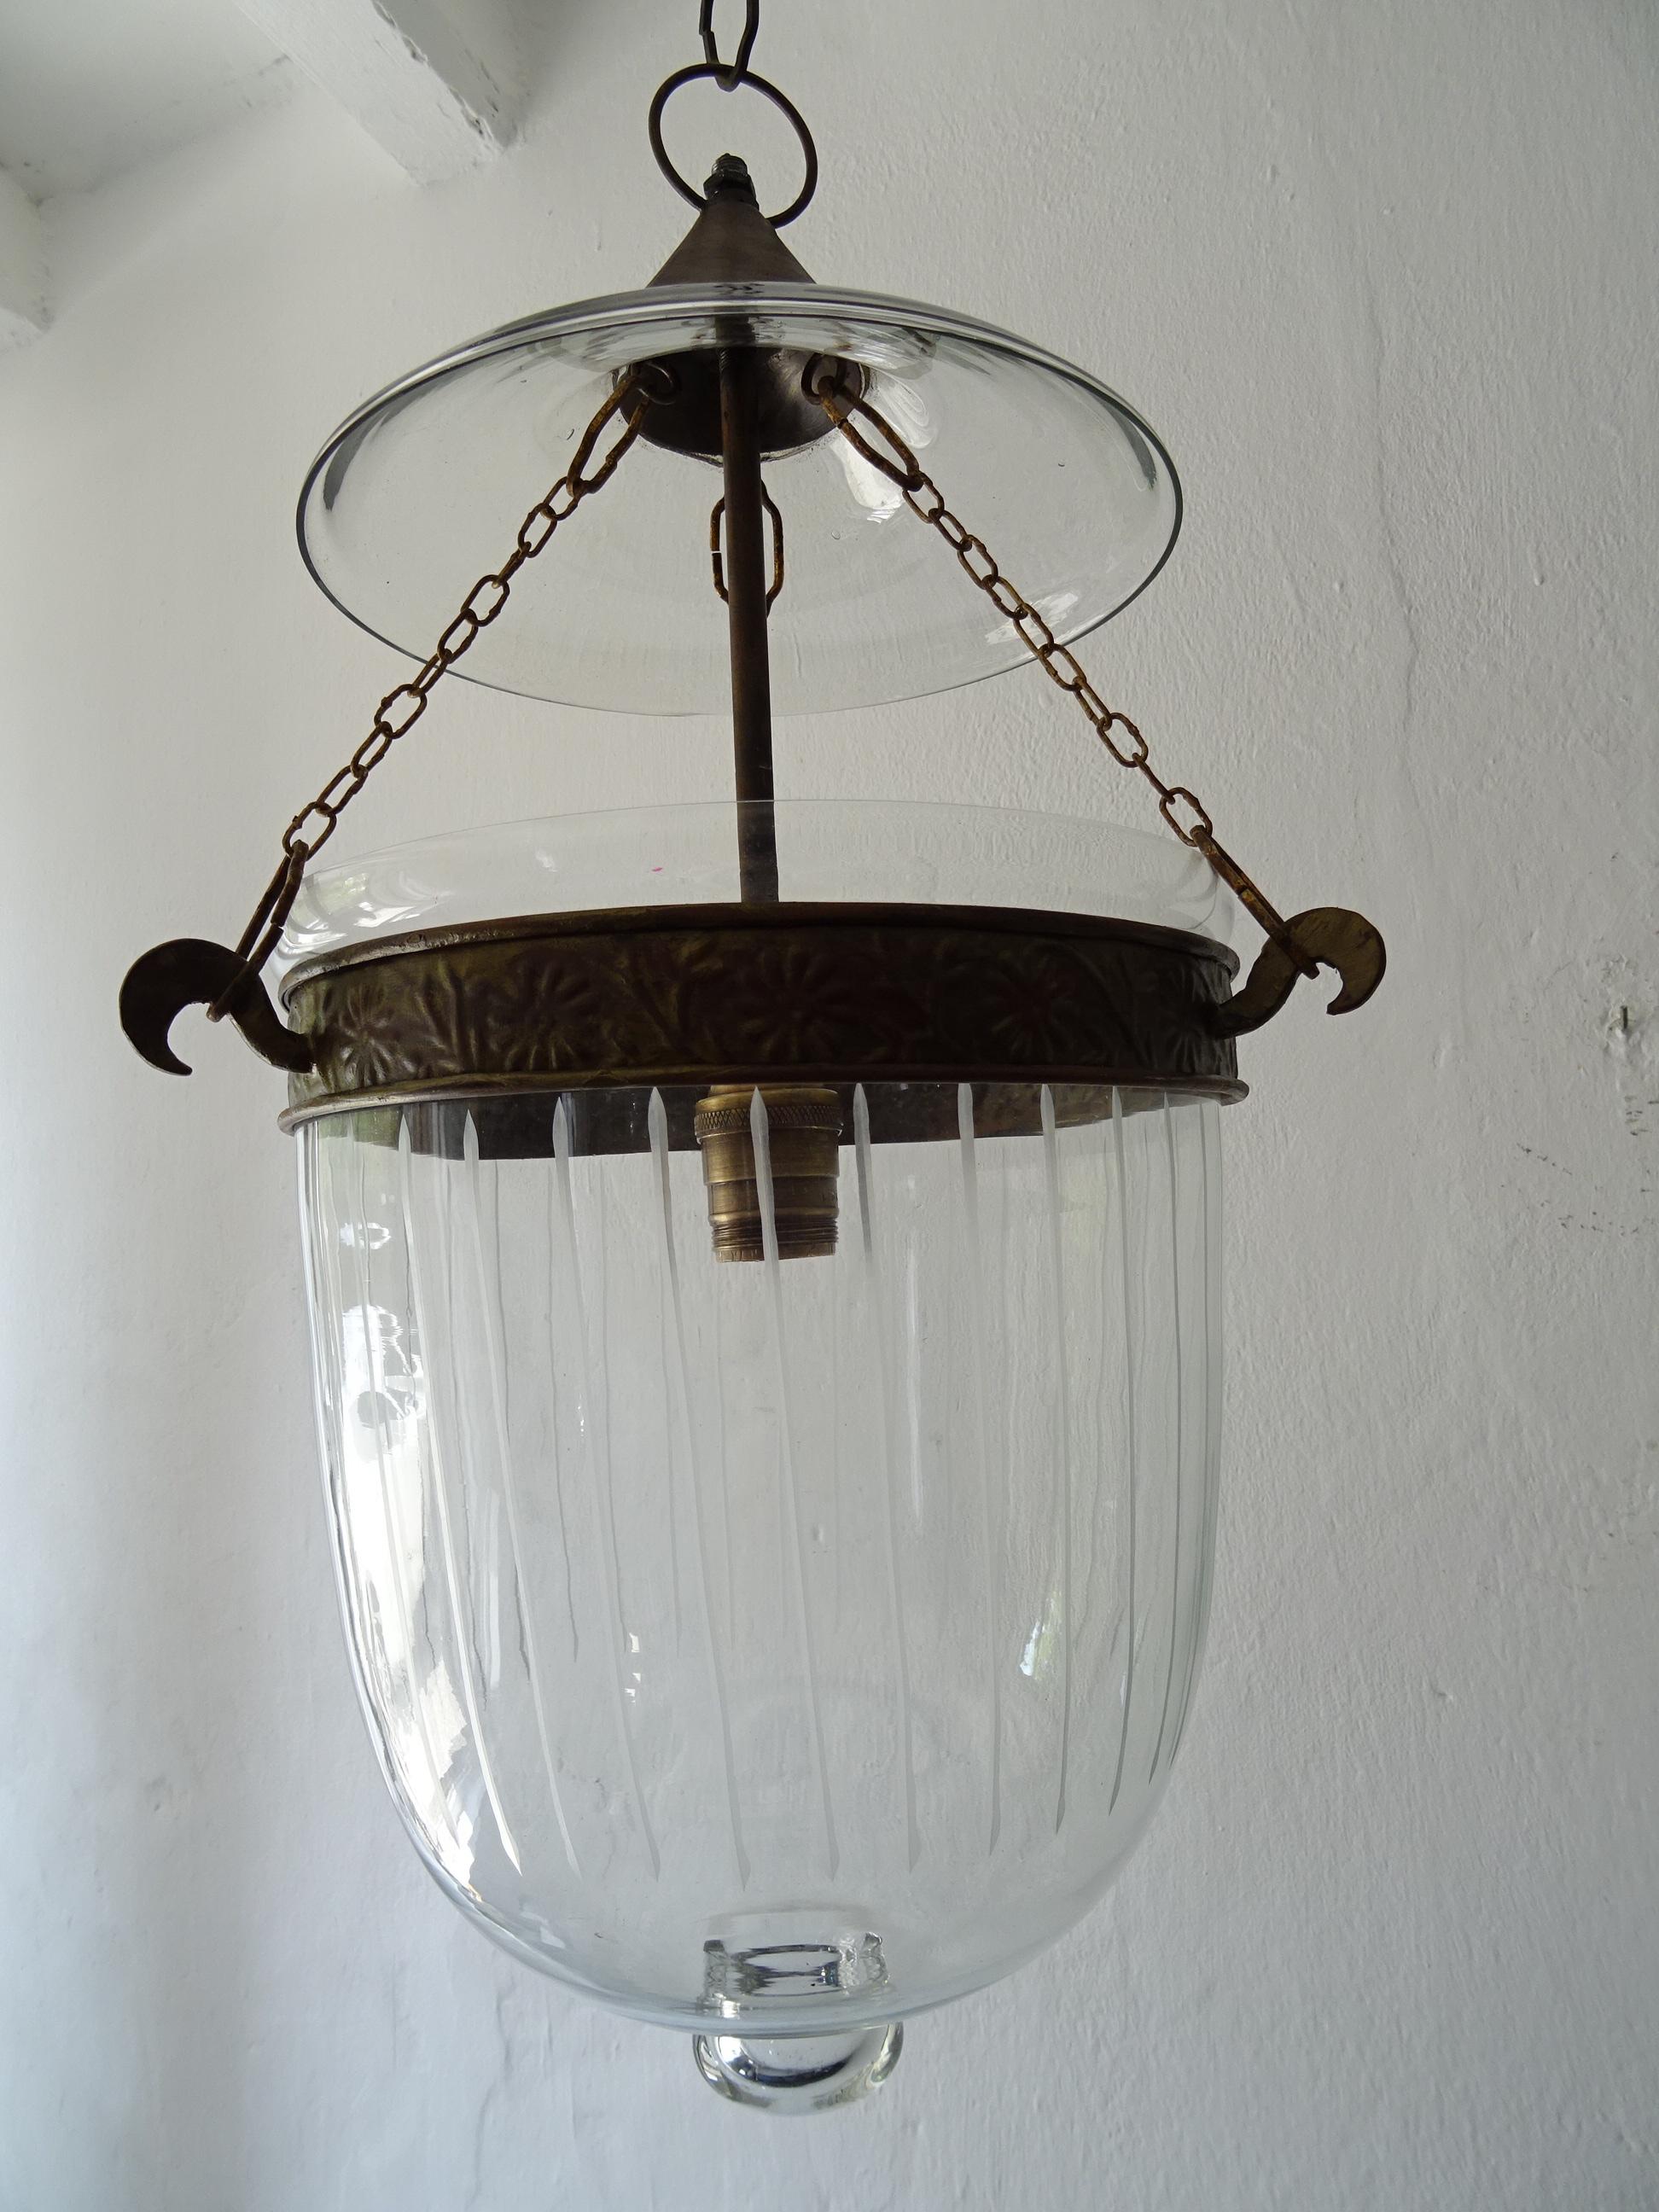 Housing one big light. Newly wired with appropriate certified US UL socket for the USA and appropriate socket for all other countries. Ready to hang. Clear with etching on bell. The bell alone measures 11 inches. Free priority shipping from Italy,